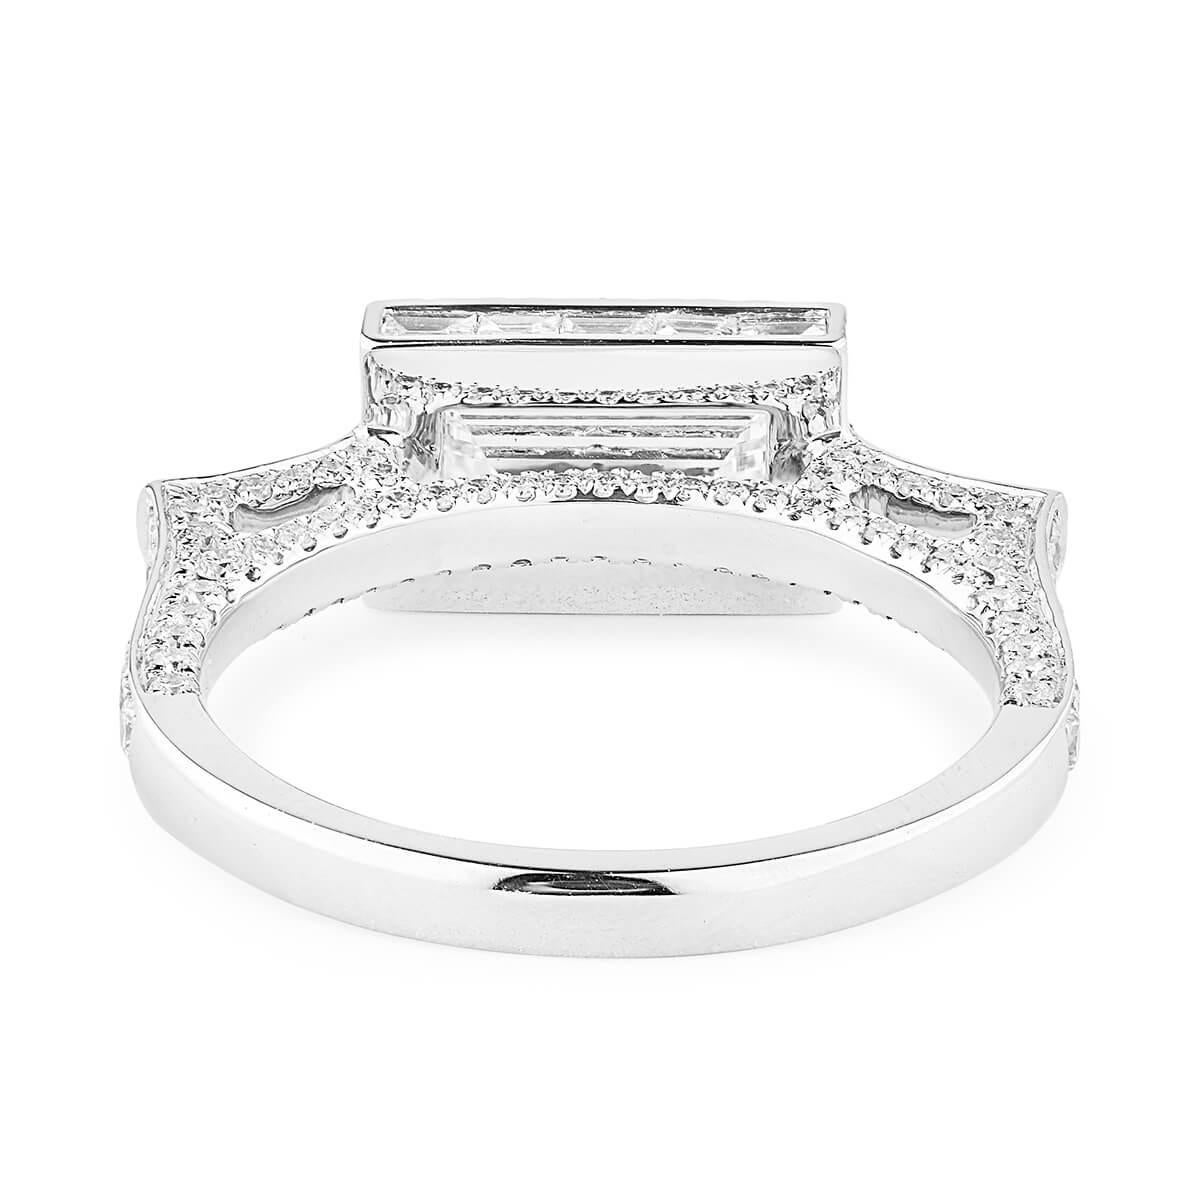 Modern GIA Certified White Gold Baguette Cut Diamond Ring Set with Brilliant Cut For Sale